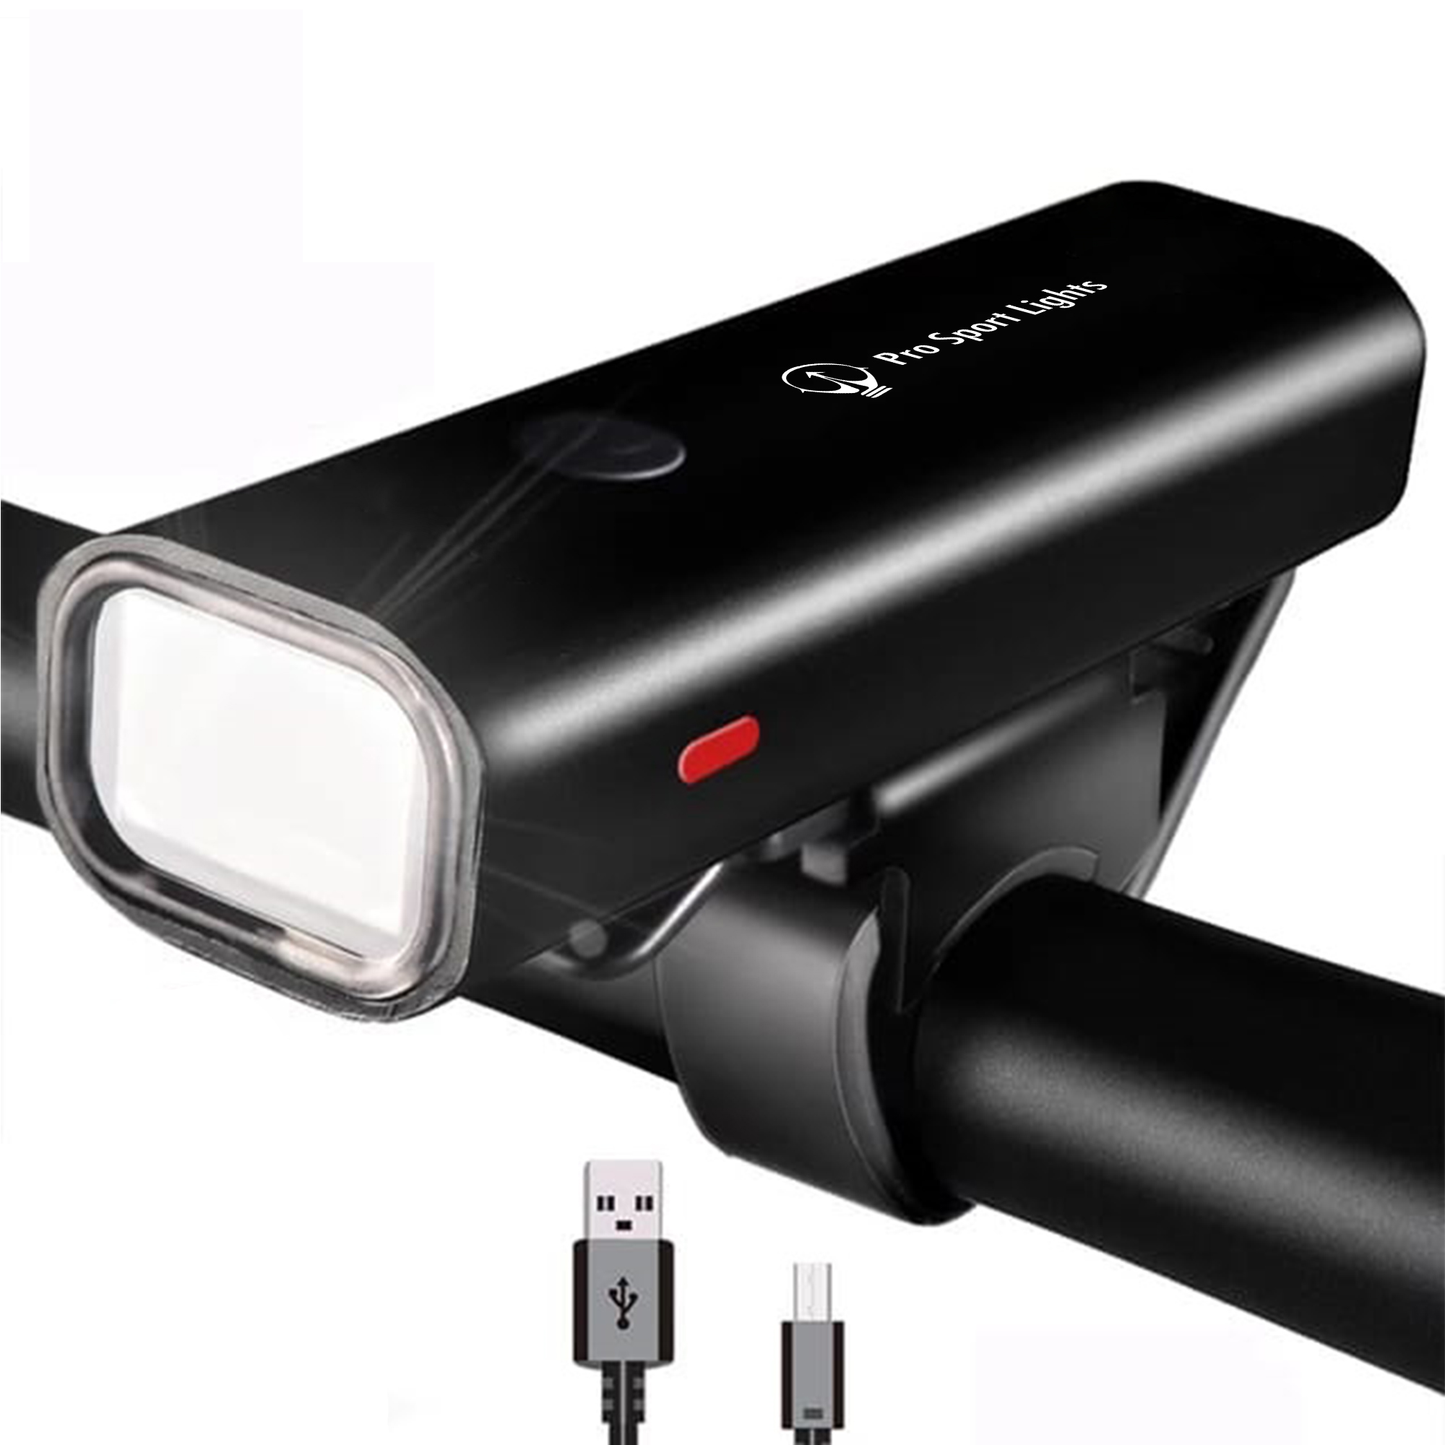 400 Lumen Pro Sport Lights - Bicycle Lights LED Micro USB Rechargeable